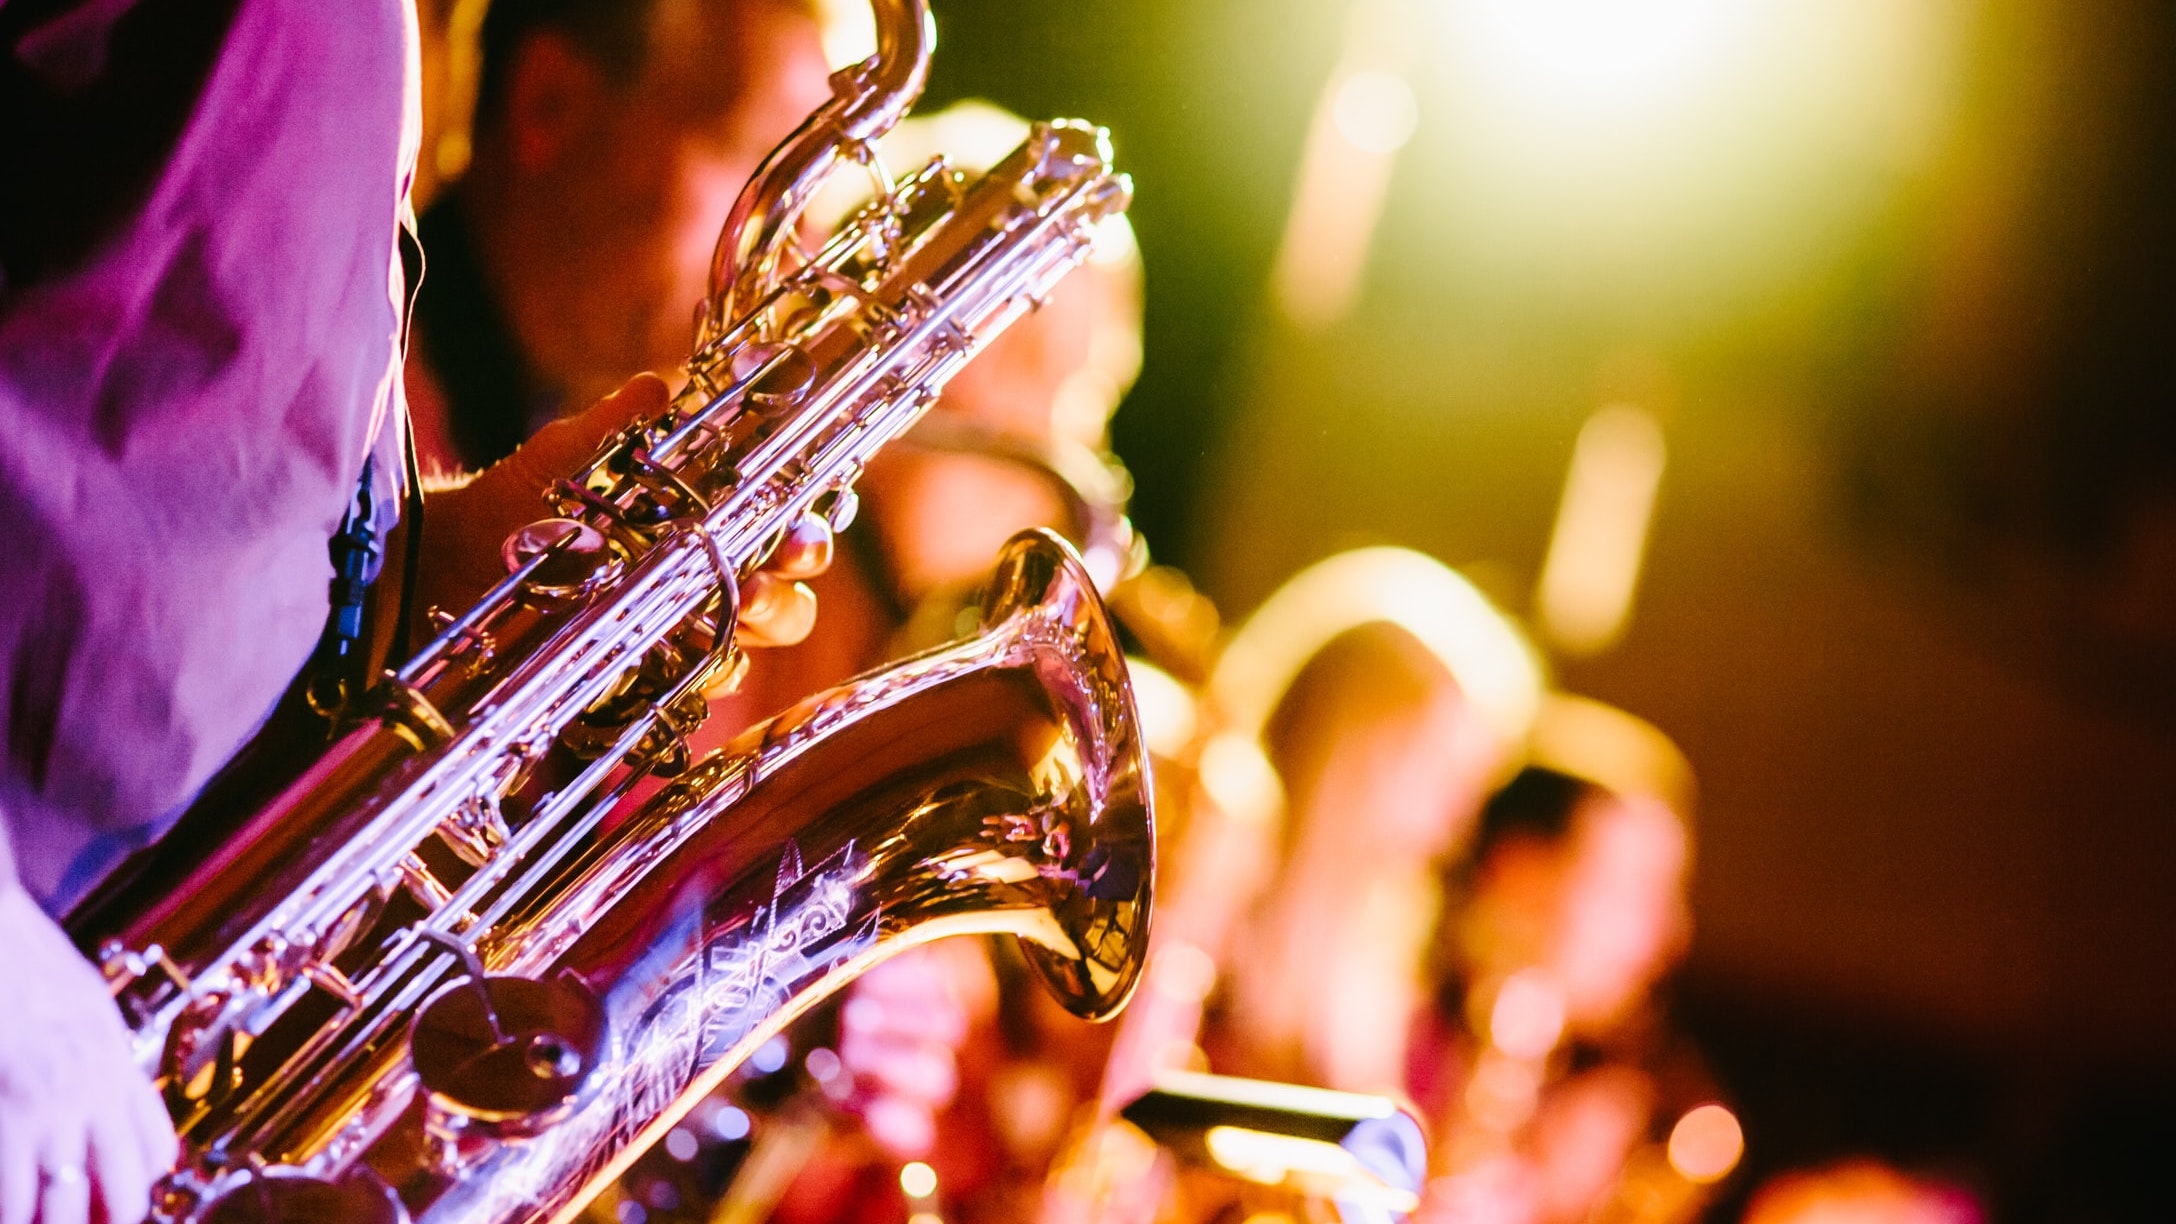 Event-Driven Architectures - Putting Jazz Into Apps